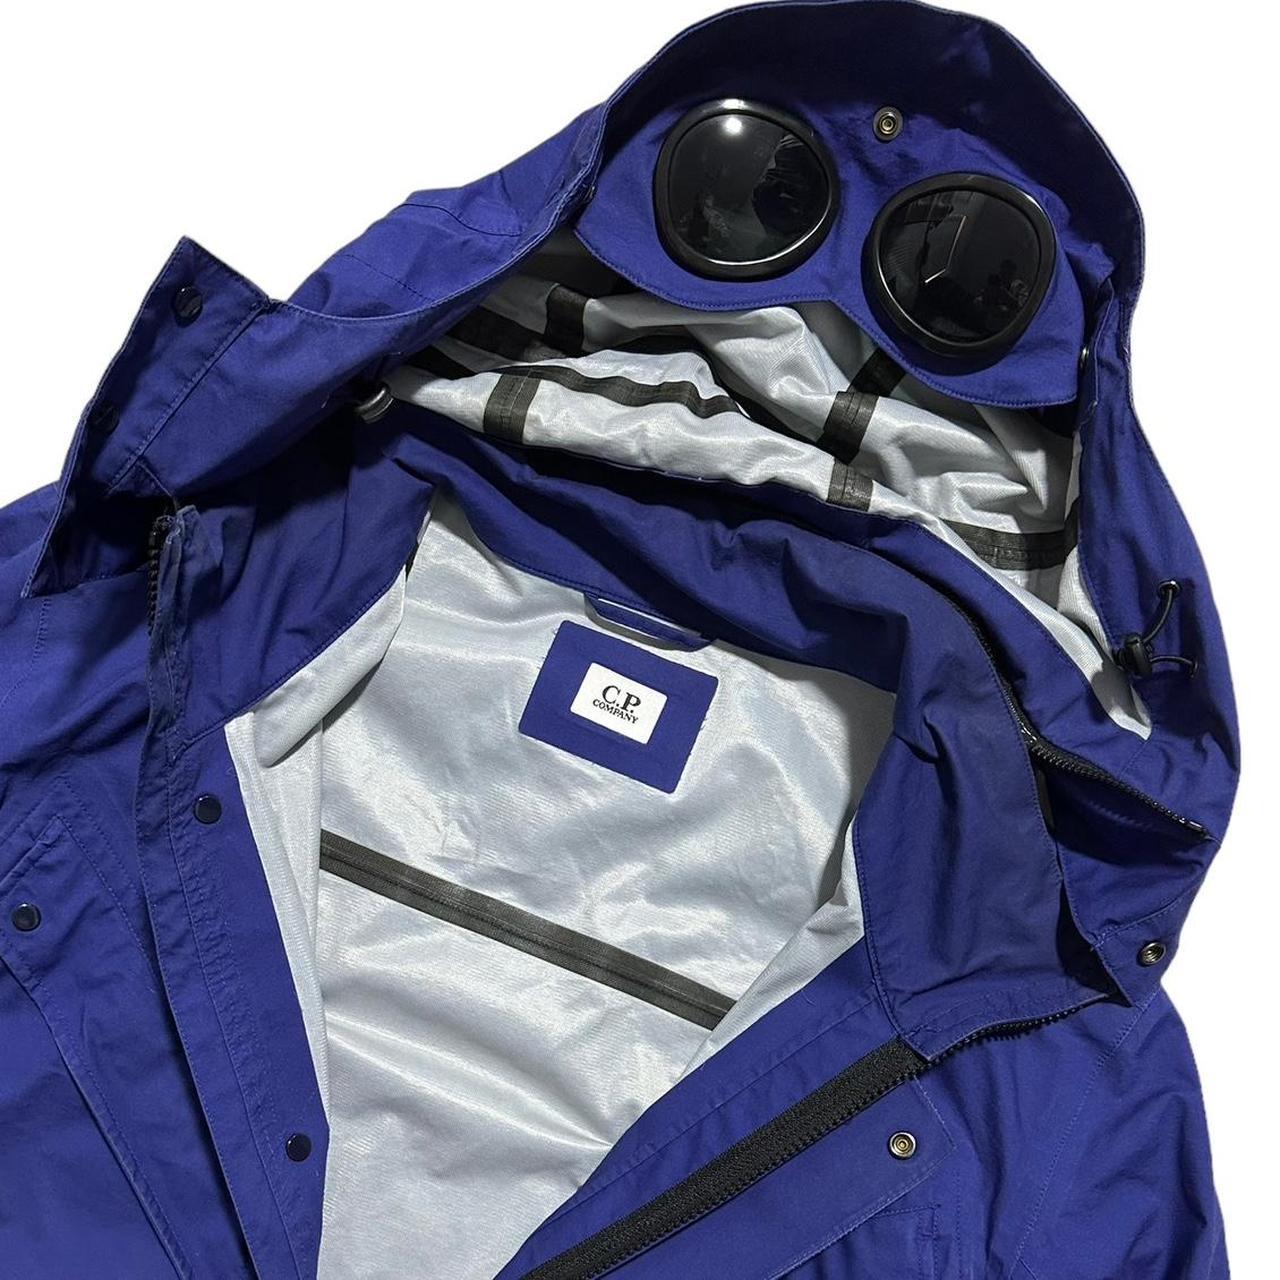 CP Company T-Mack Goggle Jacket - Known Source